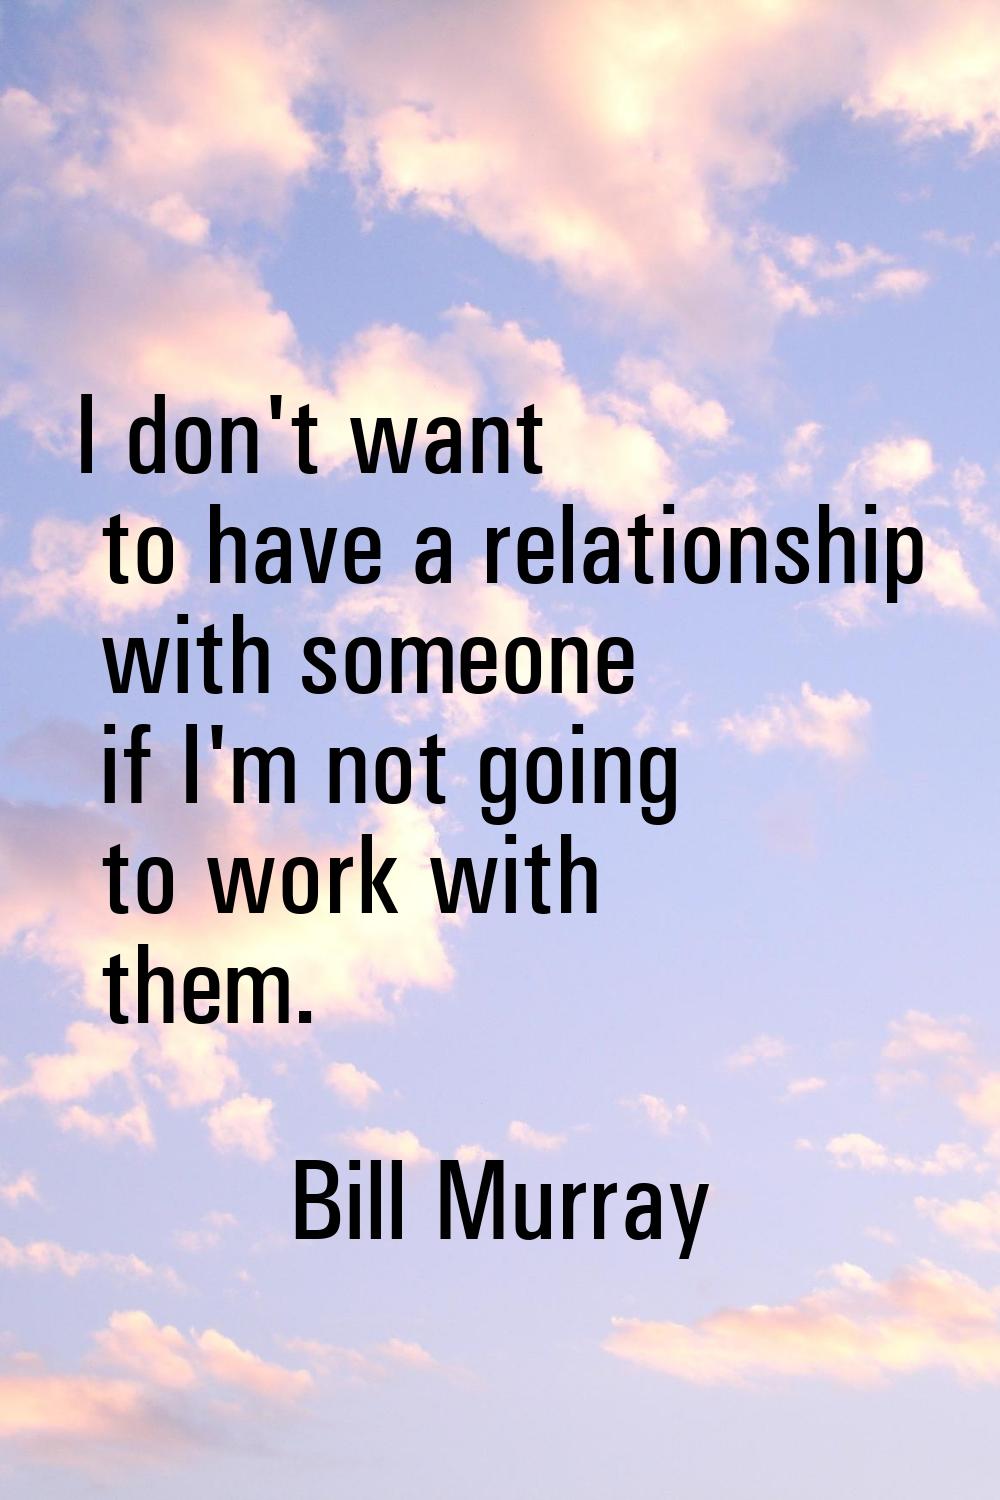 I don't want to have a relationship with someone if I'm not going to work with them.